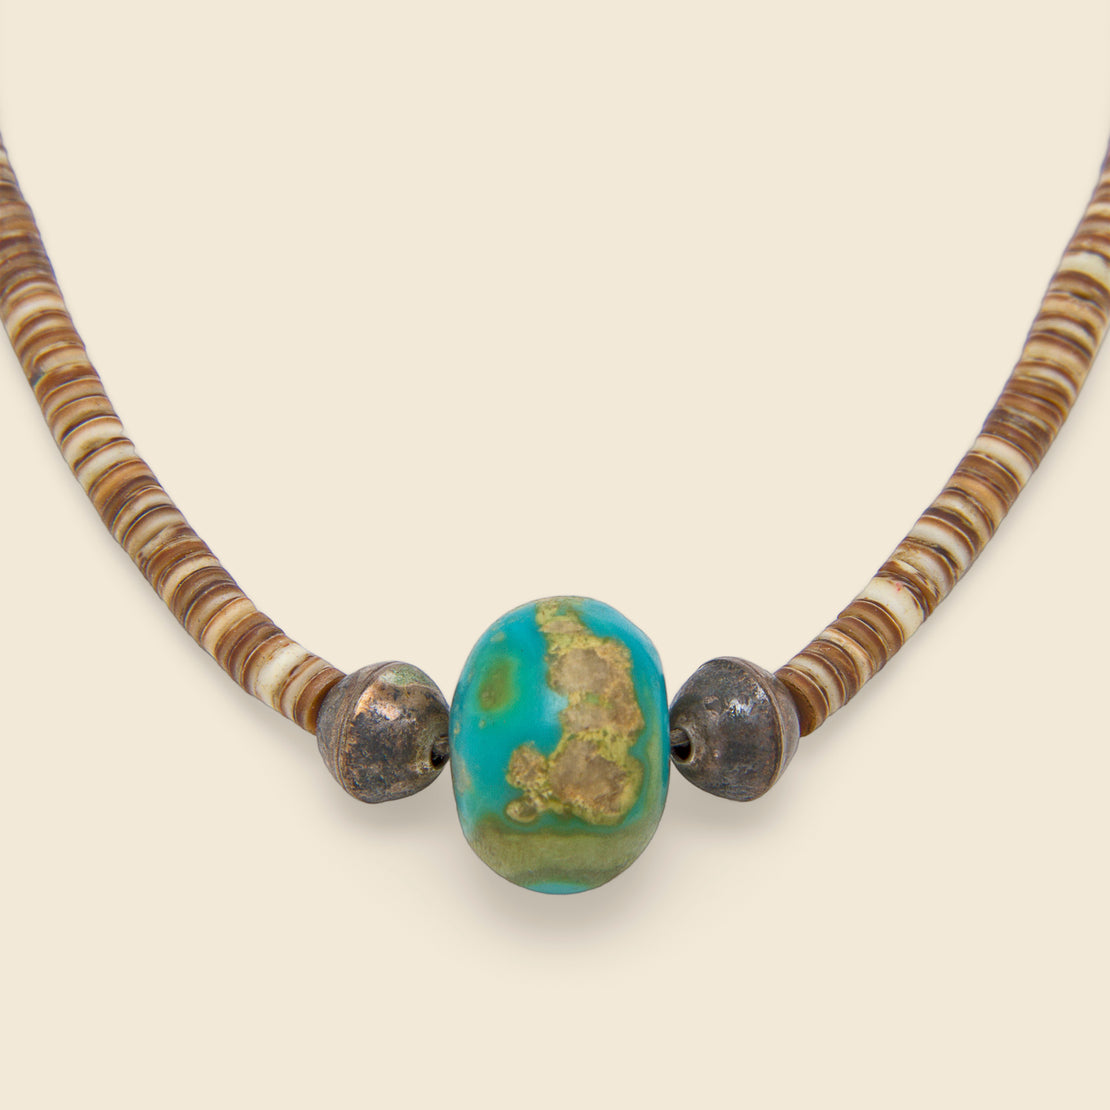 Necklace with Turquoise Pendant - Pin Shell Heishi Bead & Silver